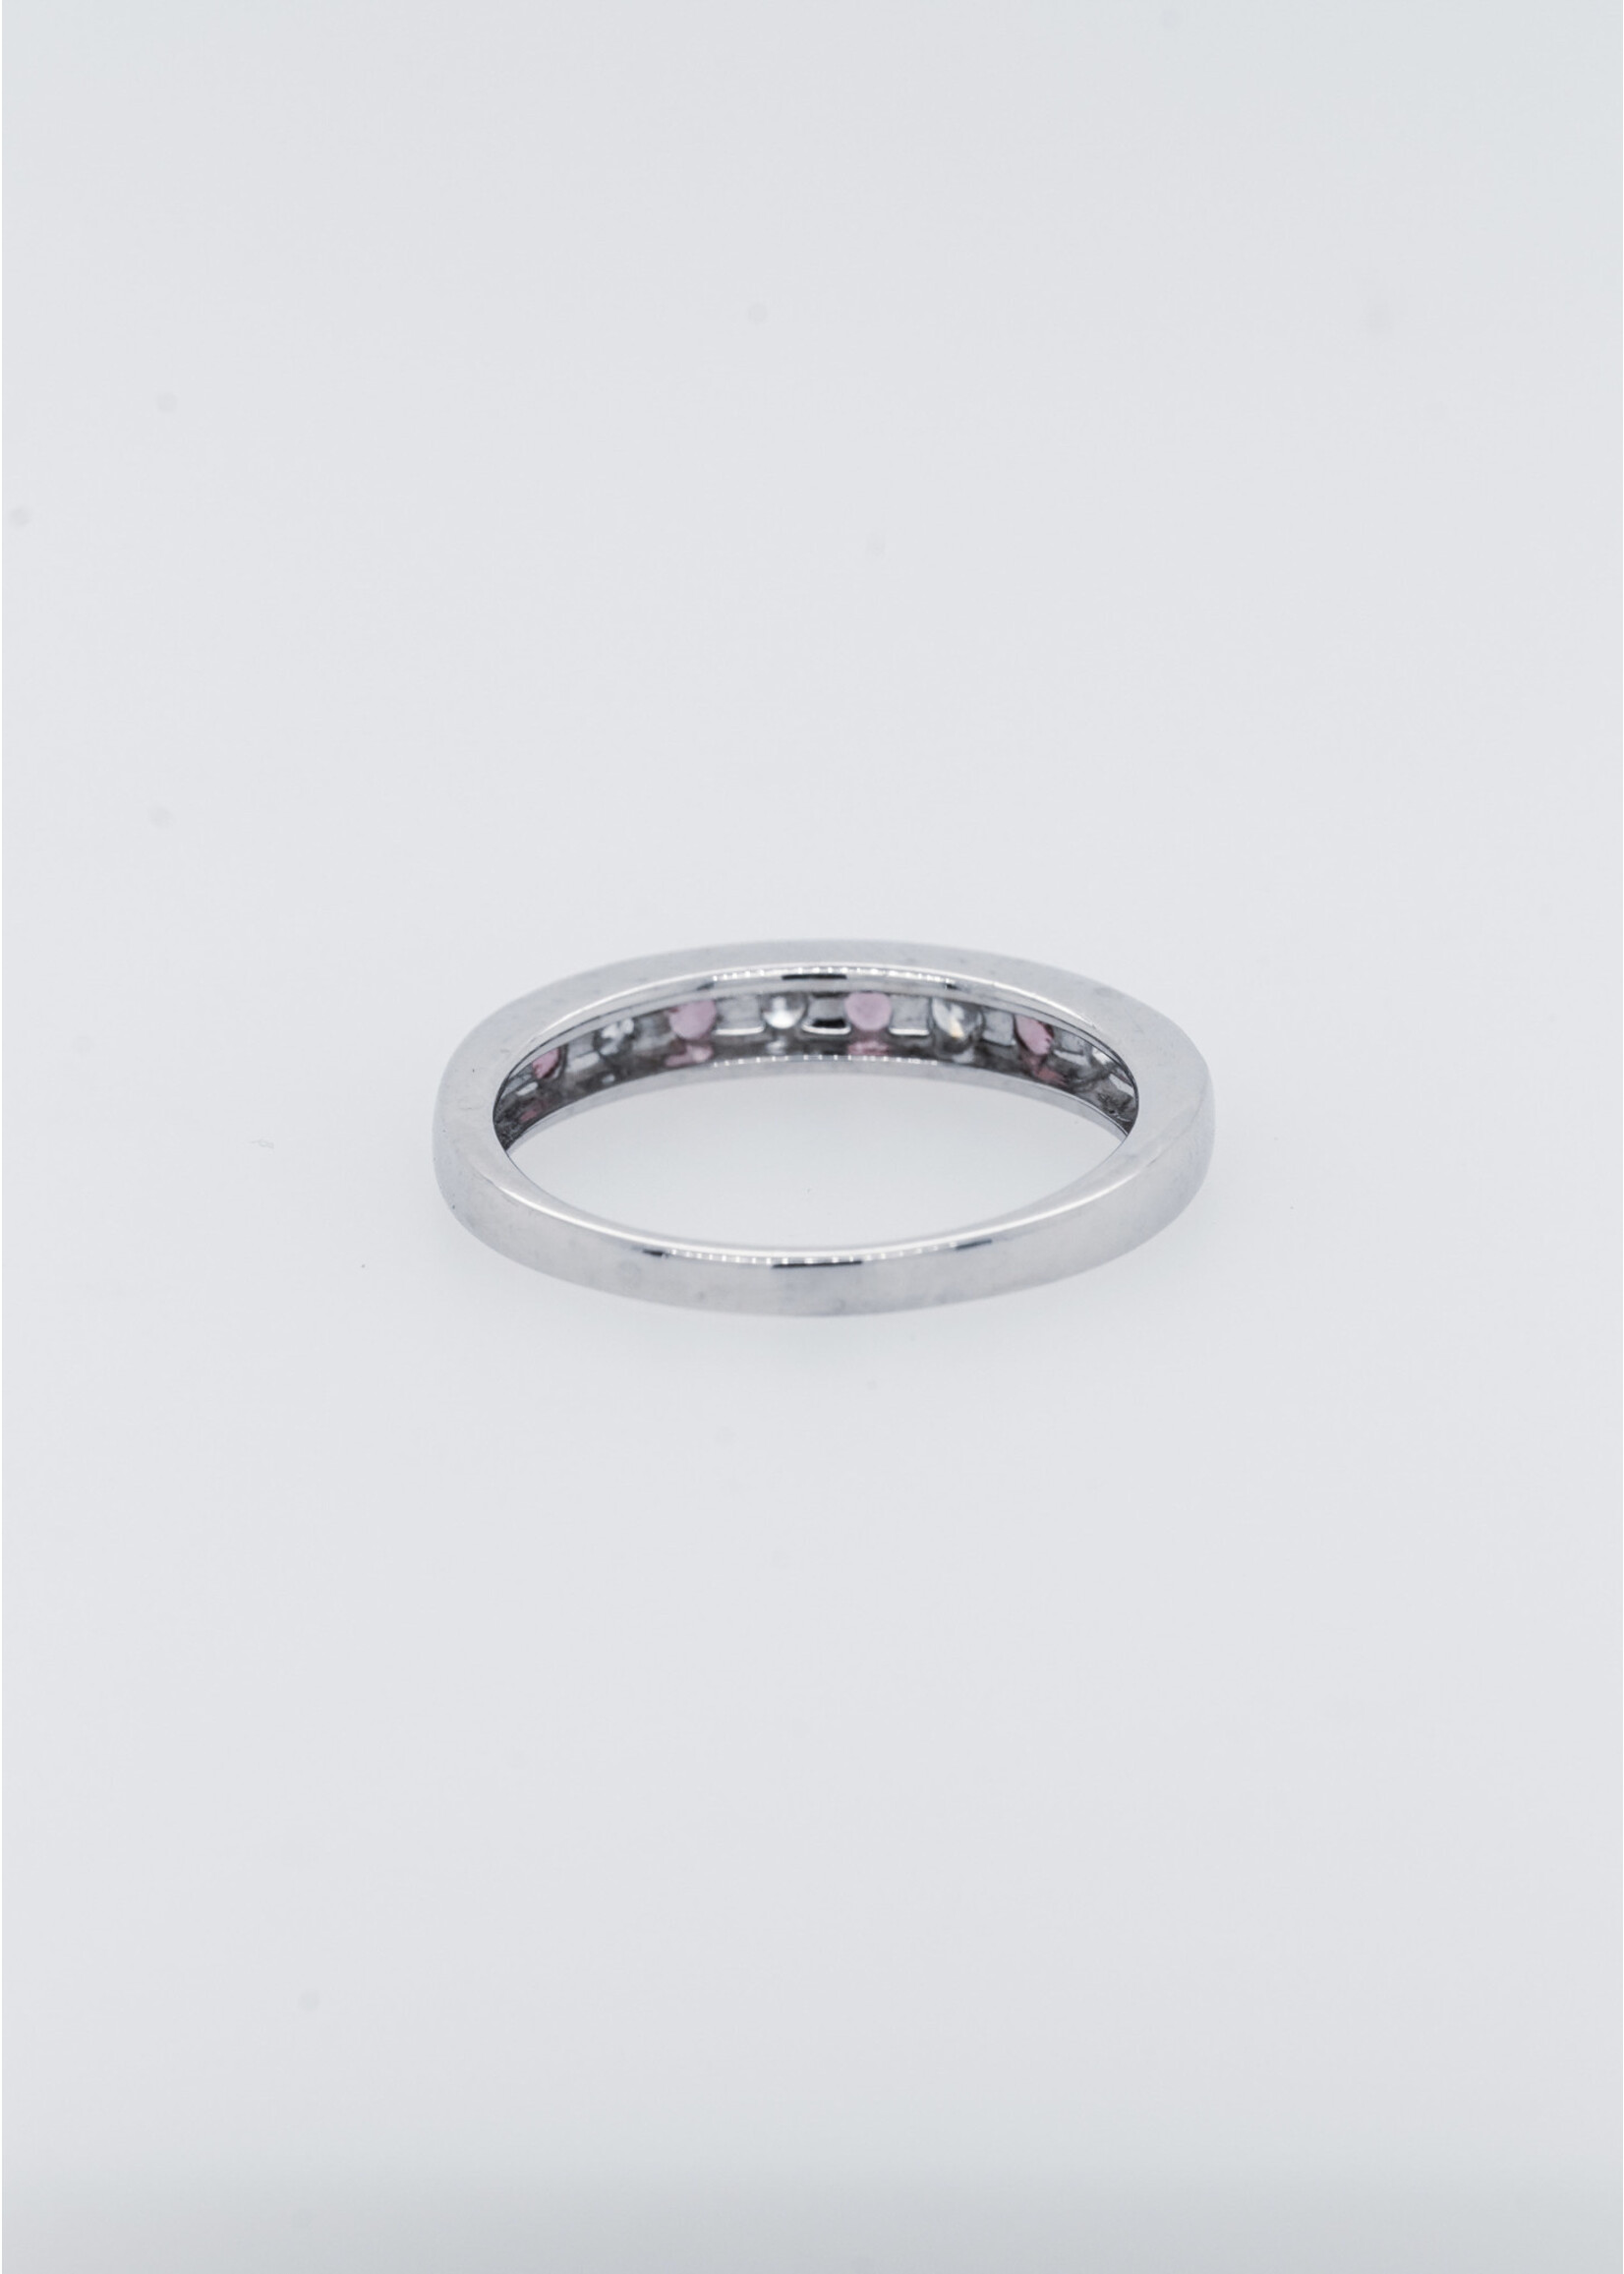 14KW 2.3g .27ctw Diamond .30ctw Sapphire Stackable Band (size 6)